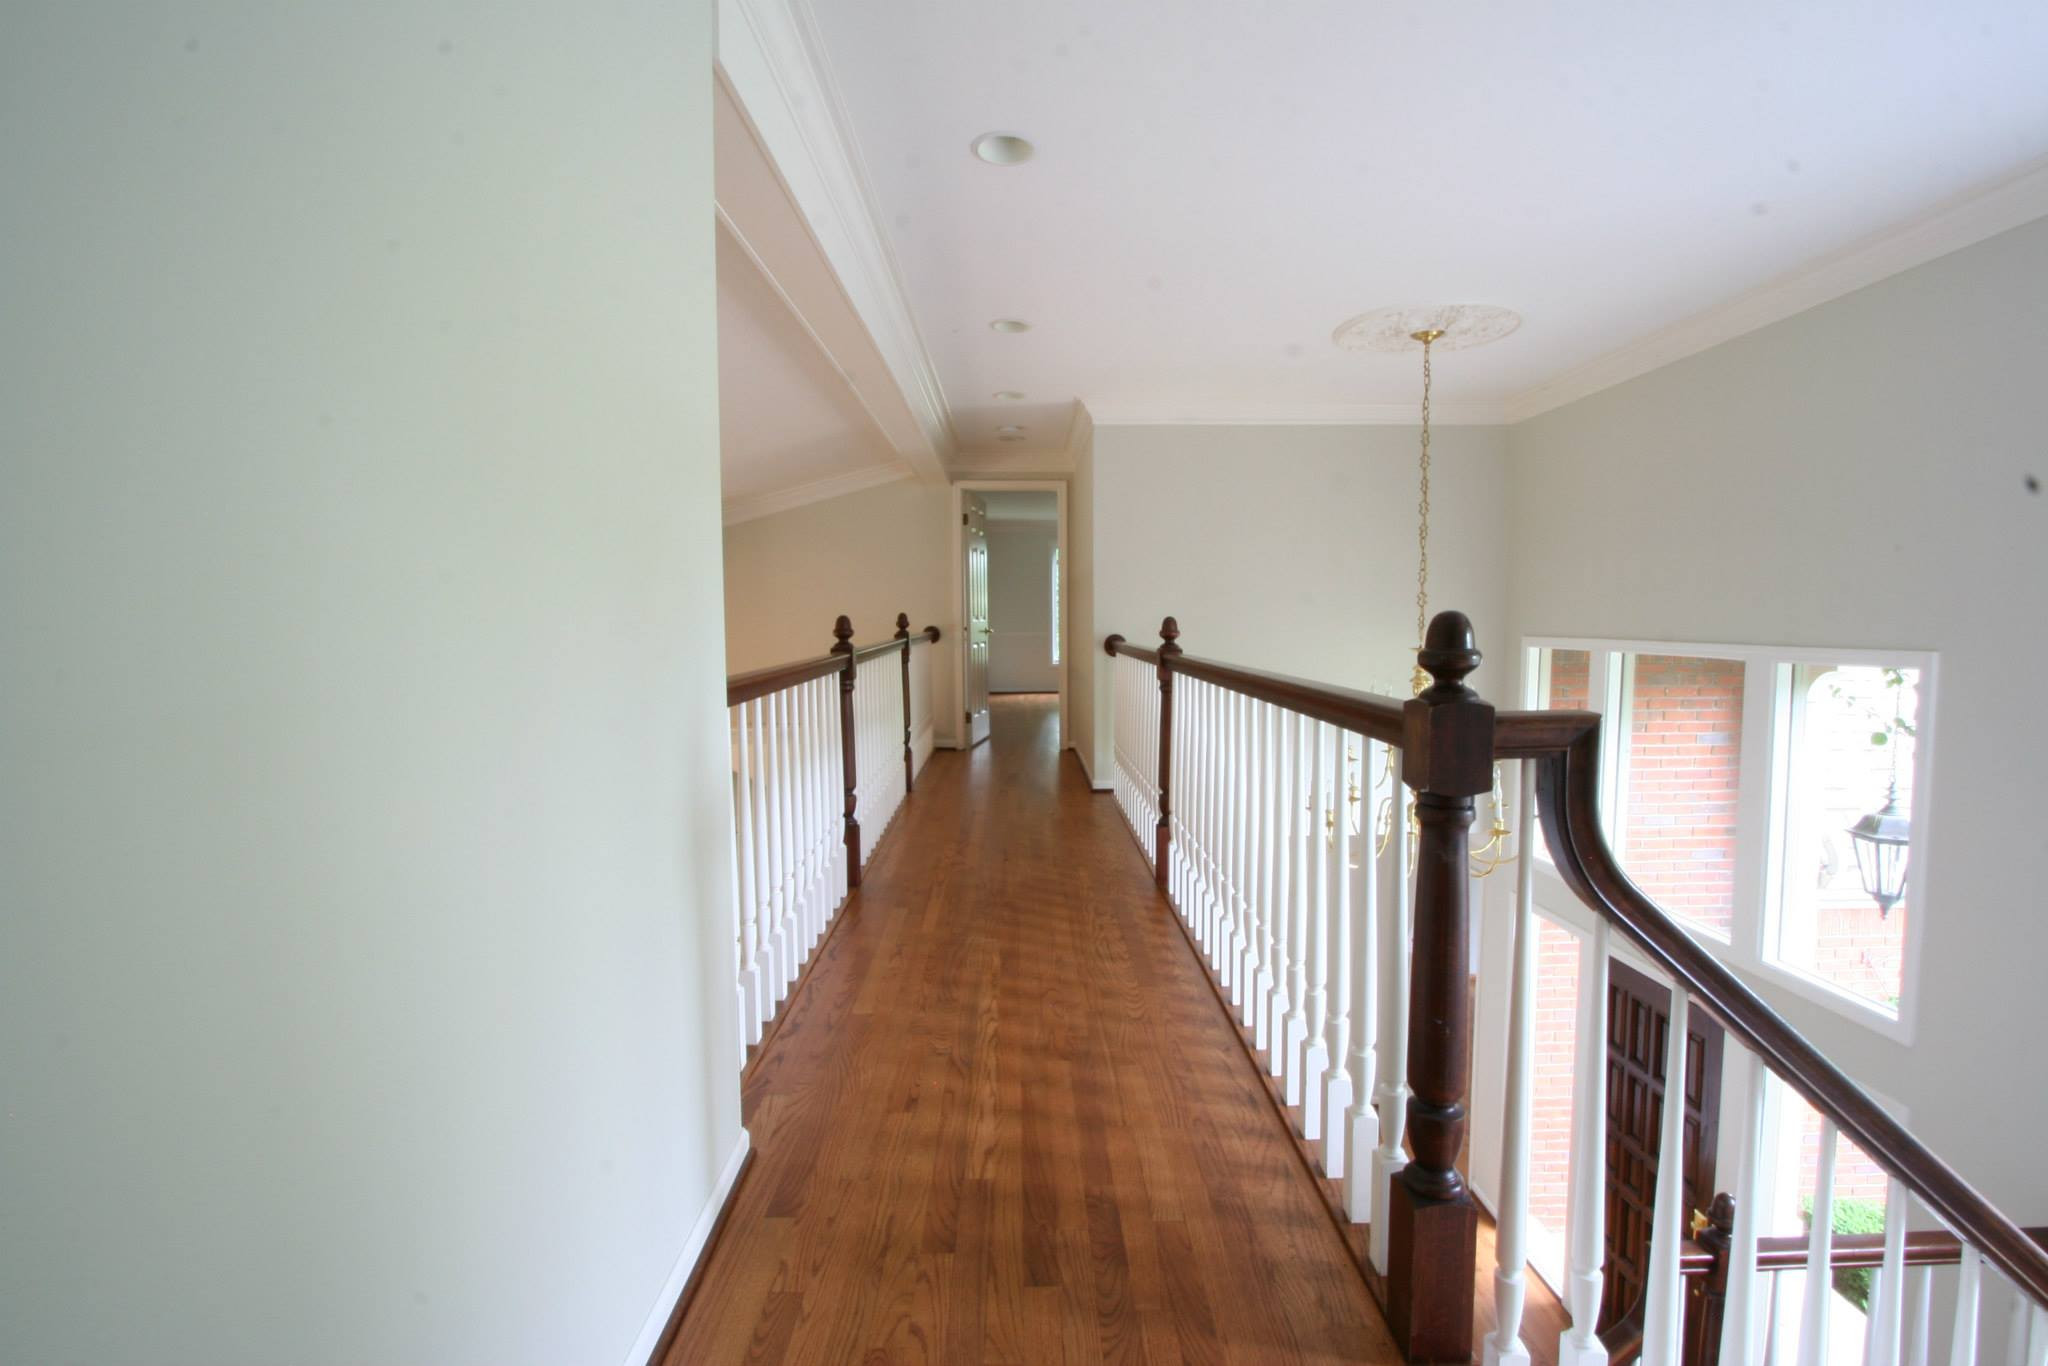 30 Lovely Hardwood Floor Refinishing Detroit Mi 2022 free download hardwood floor refinishing detroit mi of floor refinishing service troy mi floor refinishing service near in for more information about what kapalua floors can do for you and your home call 